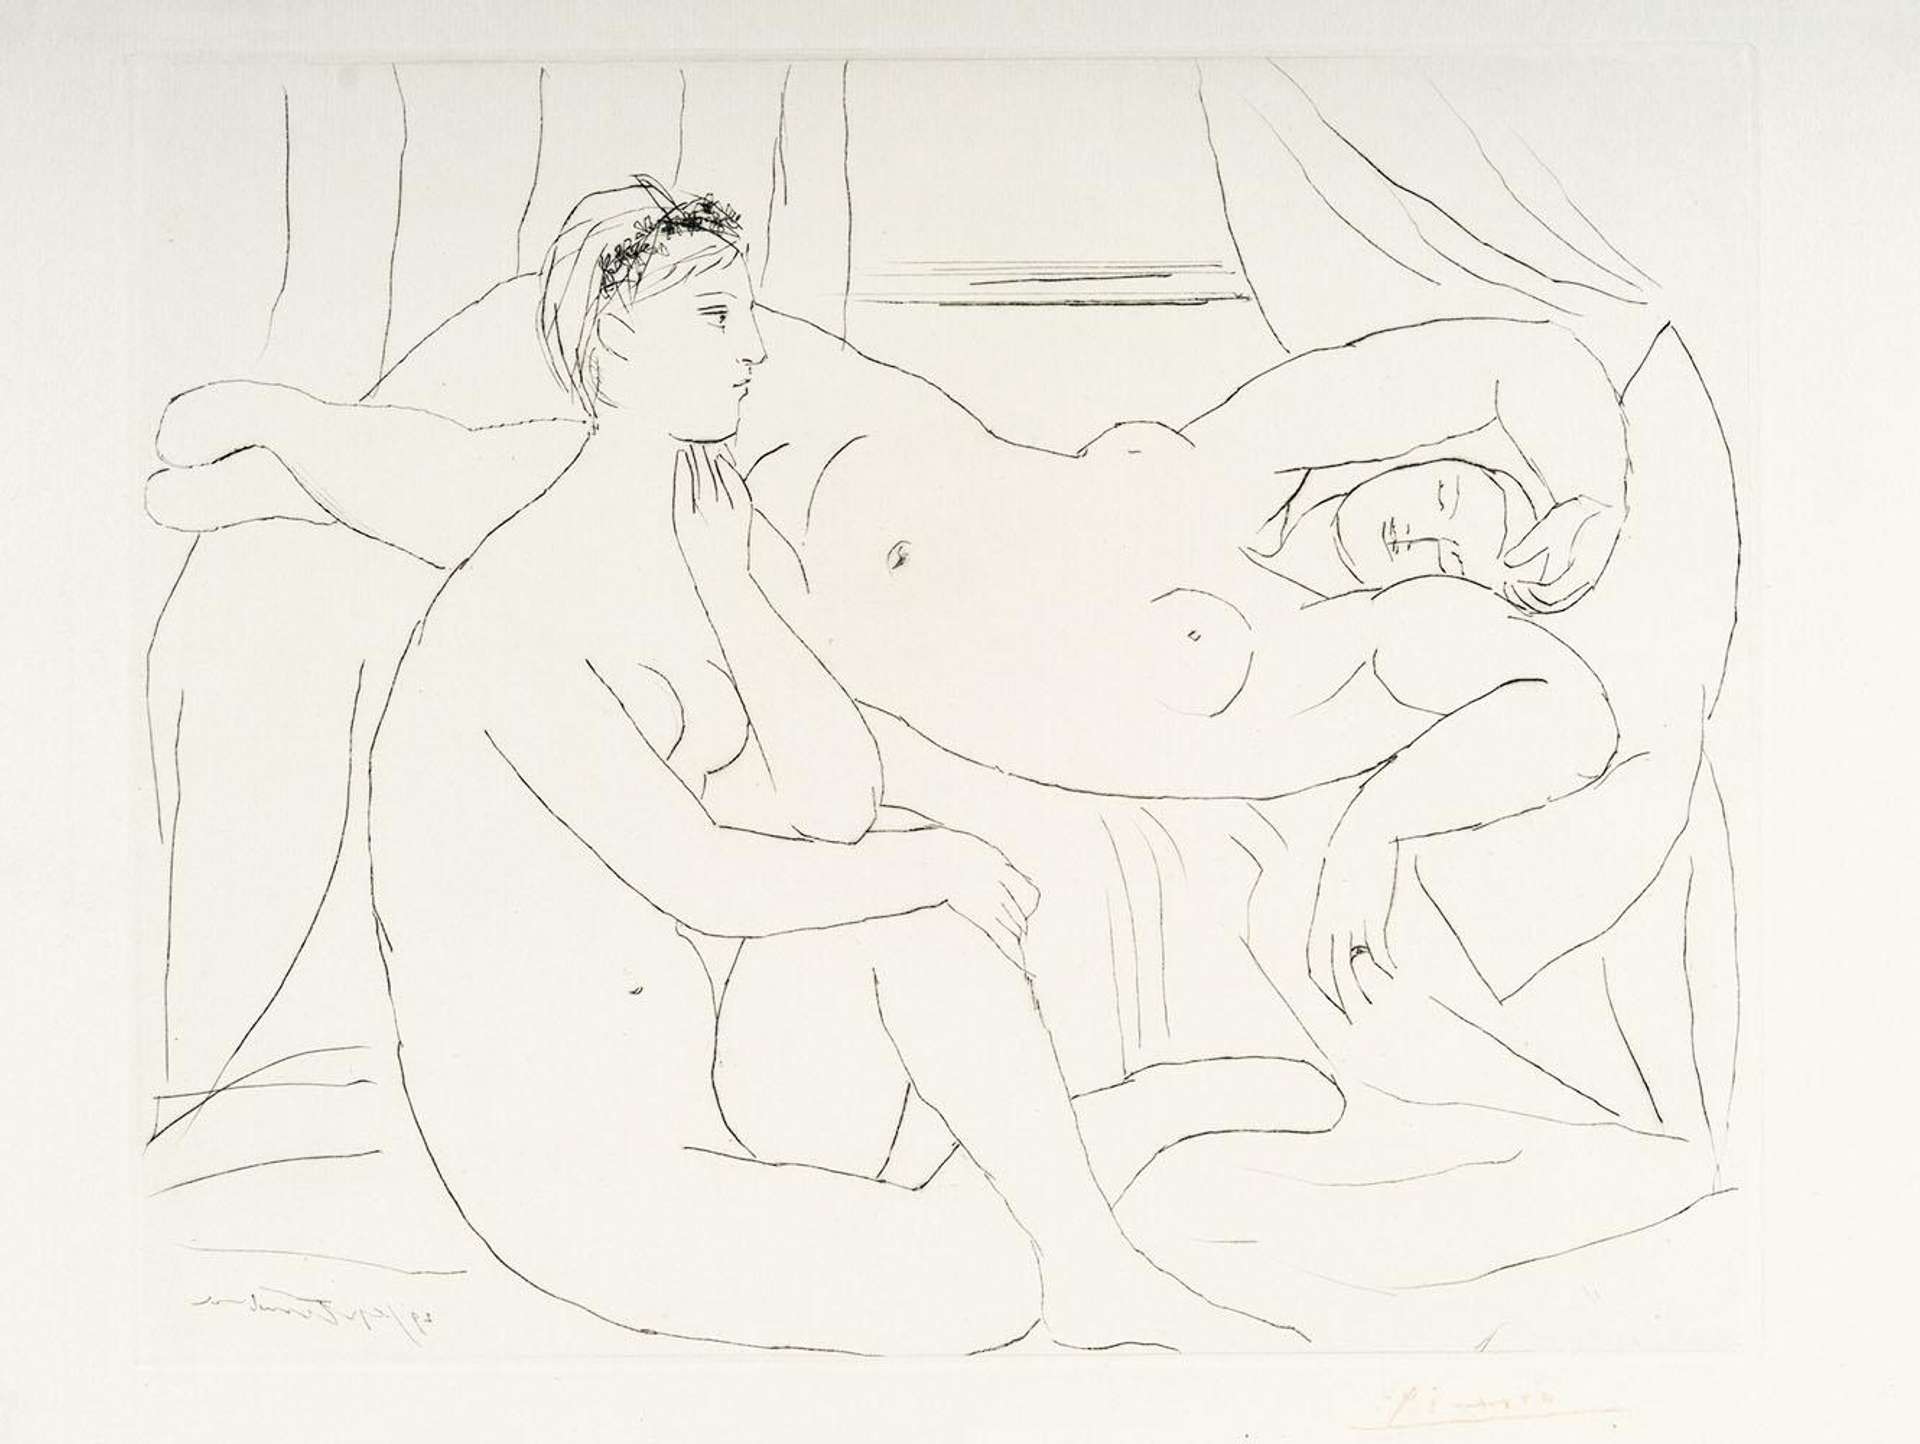 An image of the monochrome print Deux Femmes Se Reposant by Pablo Picasso, showing two nude females resting on a bed.